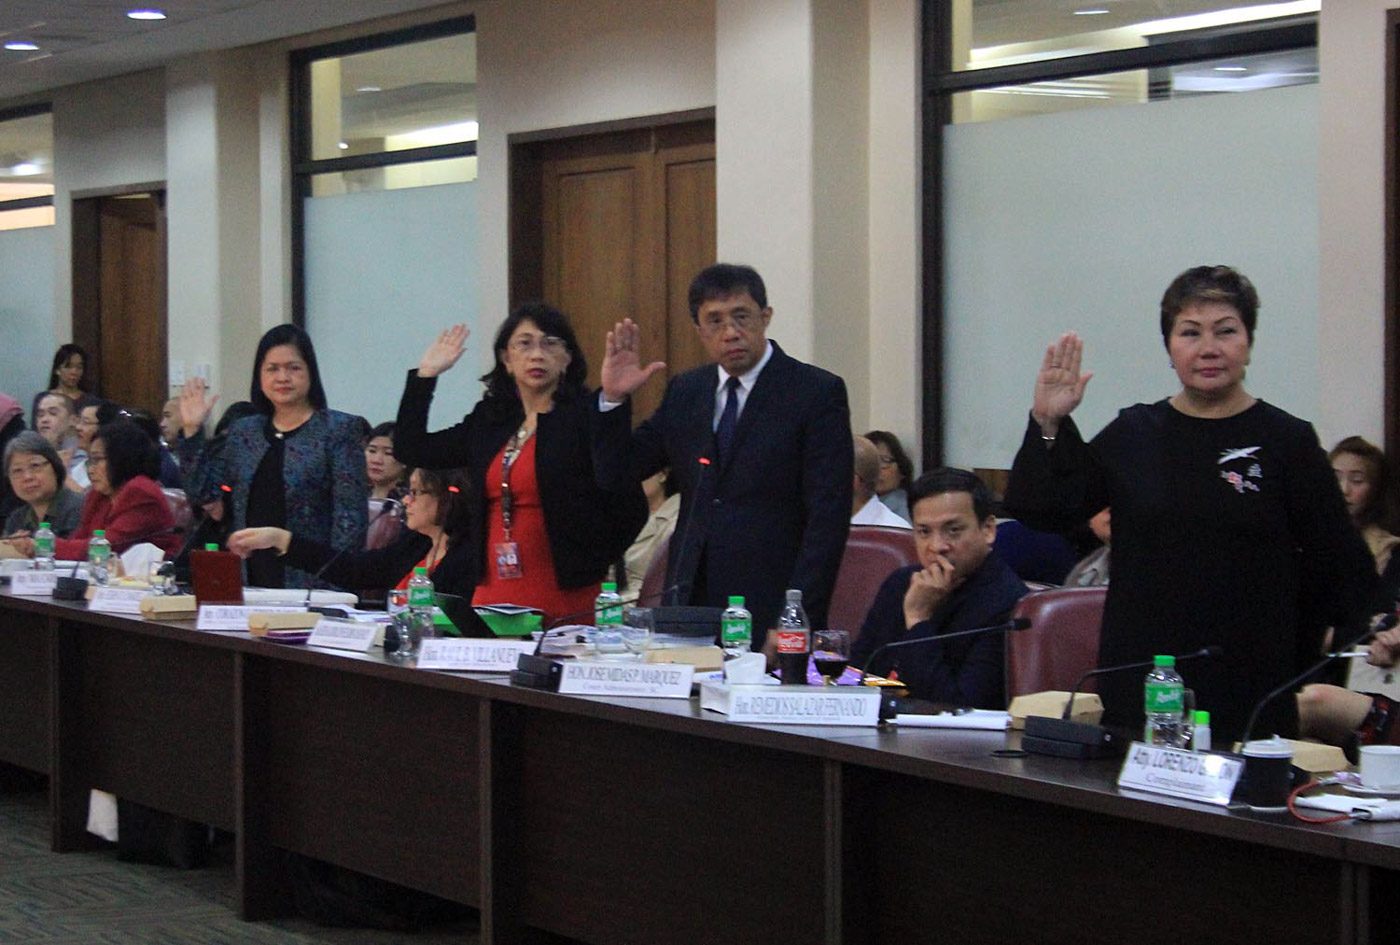 I.T. contract mess has serious implications for Sereno – Umali